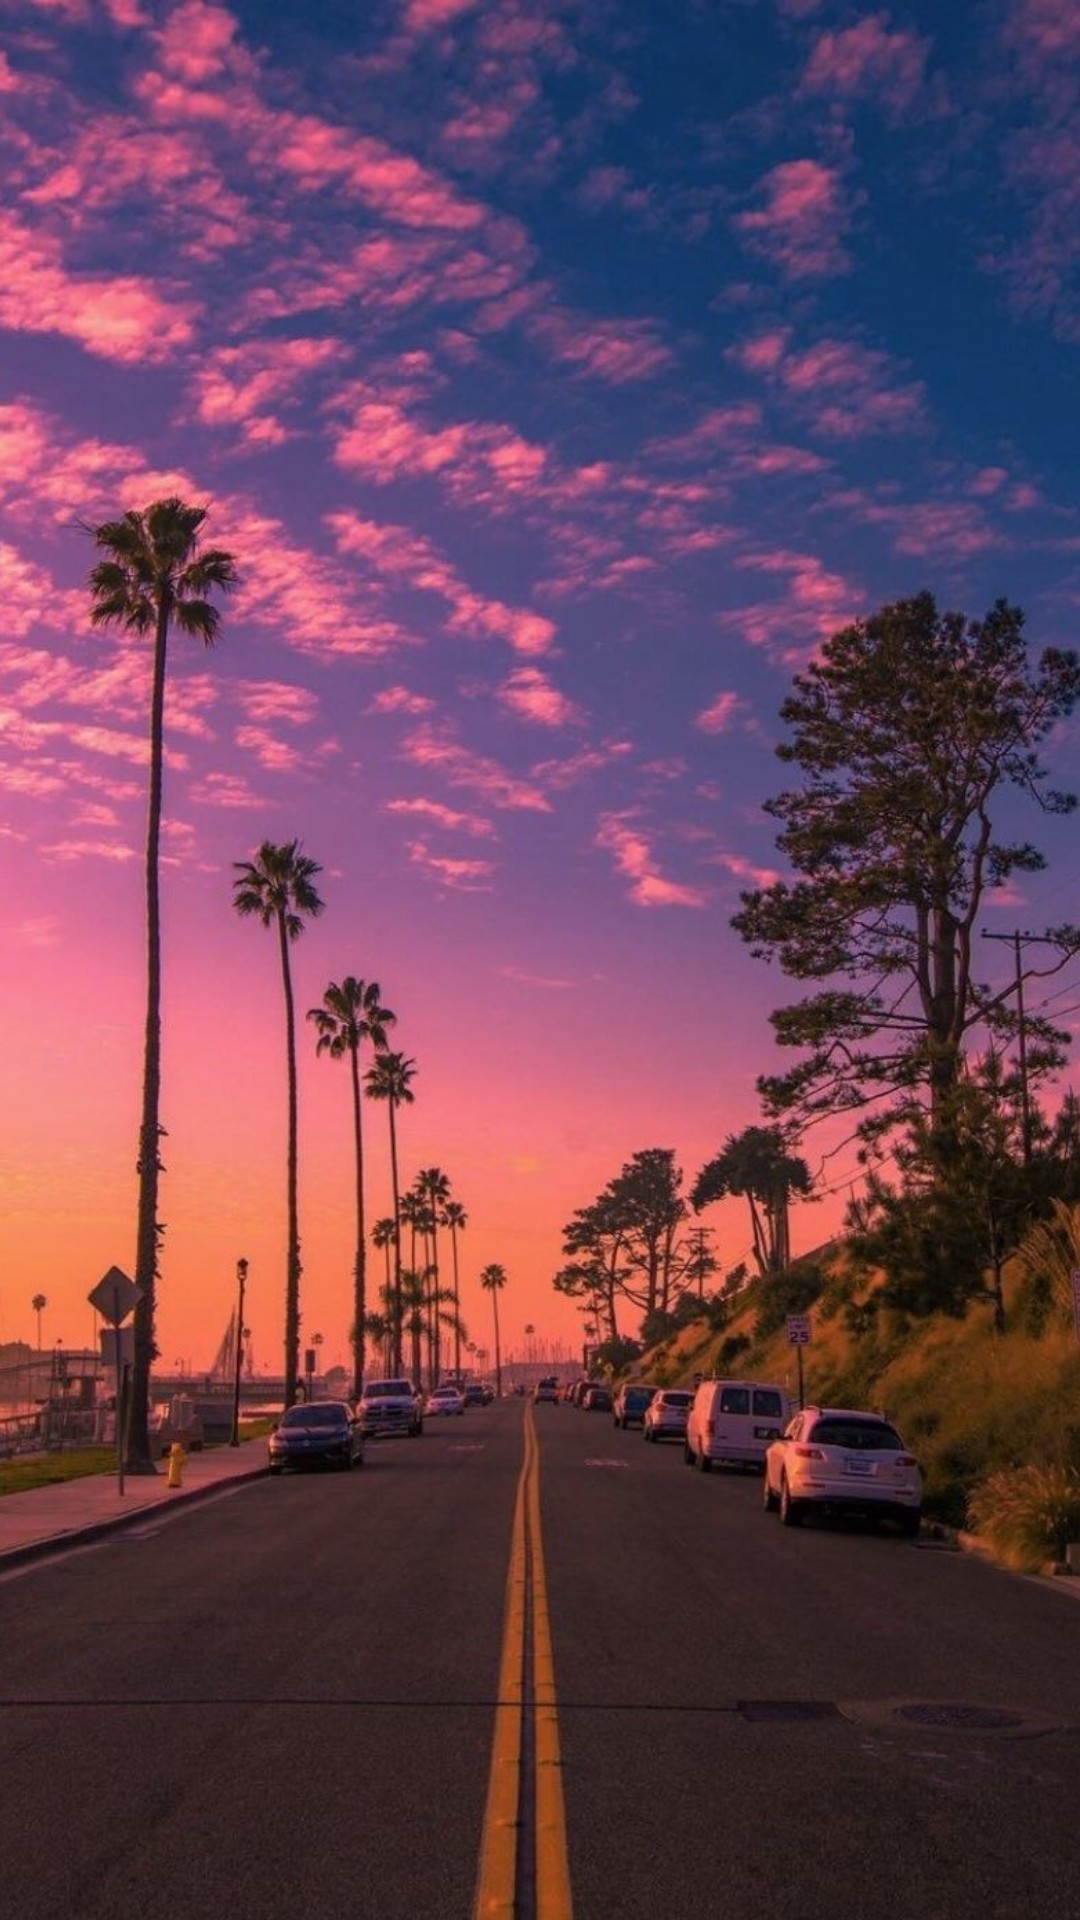 A beautiful sunset over a street lined with palm trees. - Sunset